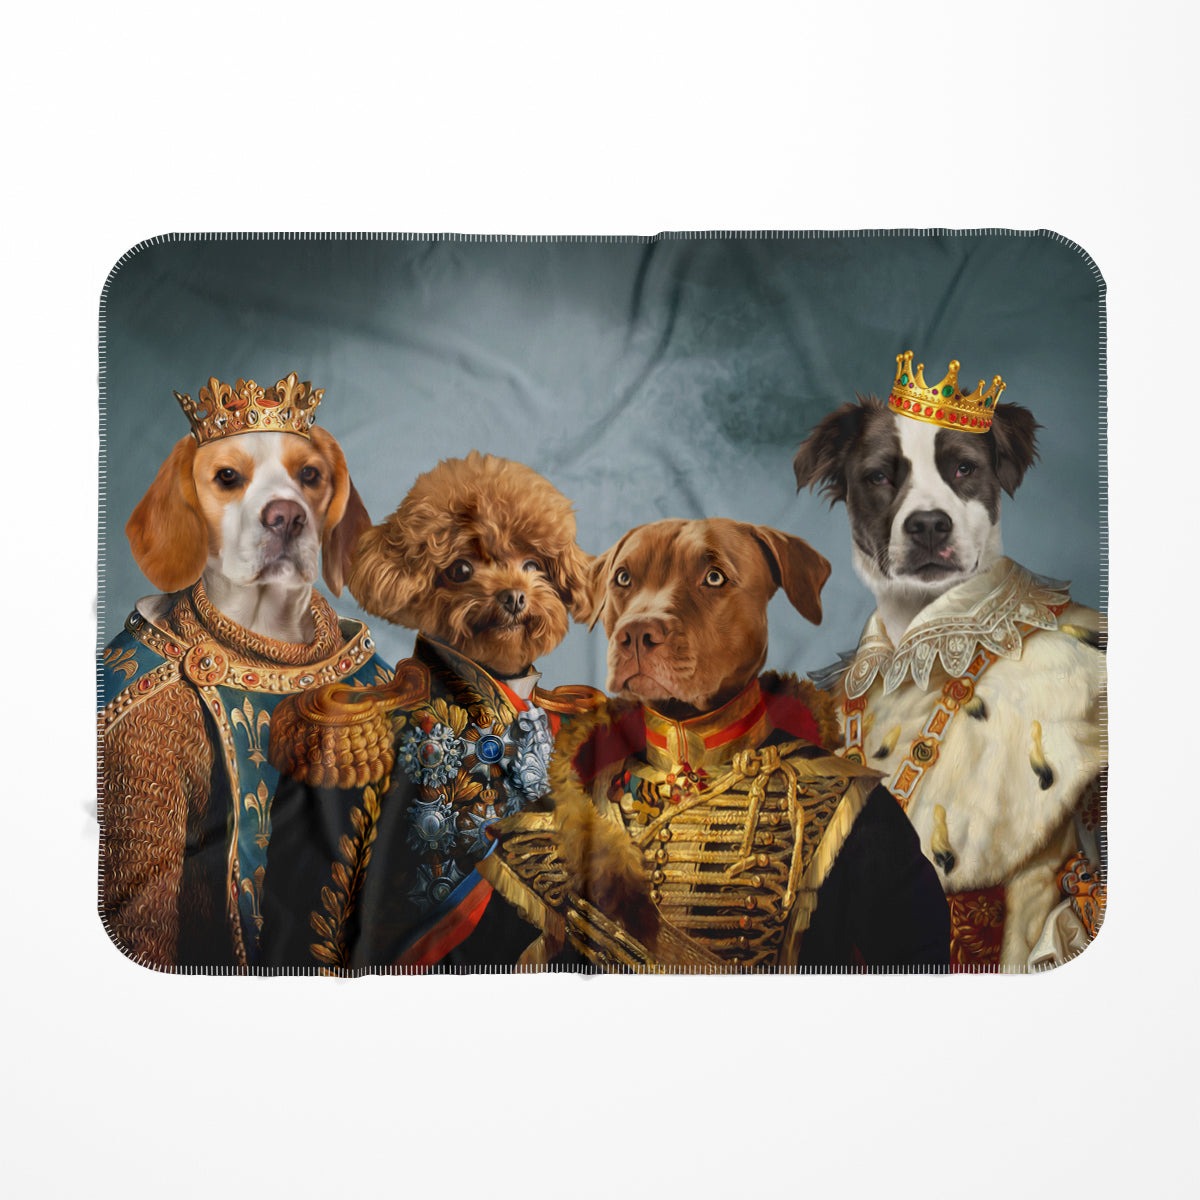 The Male Royals: Custom Pet Blanket, Paw & Glory, Paw and glory, dog and cat paintings, personalised pet art, pet art, dog picture blanket, classic dog paintings